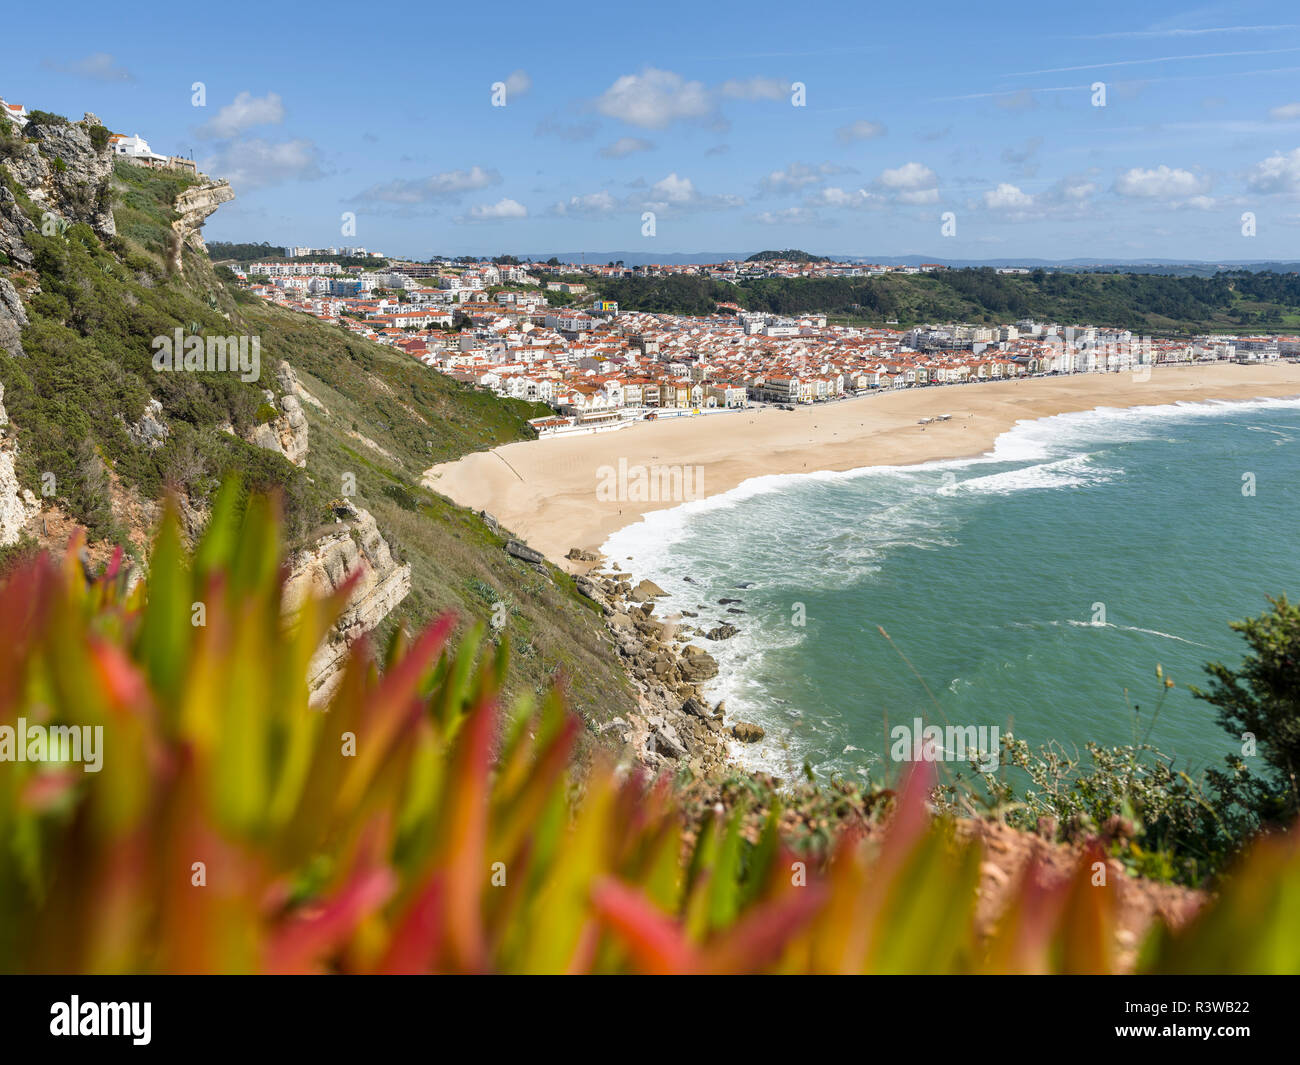 View over town and beach from Sitio. The town Nazare on the coast of the Atlantic Ocean. Portugal Stock Photo